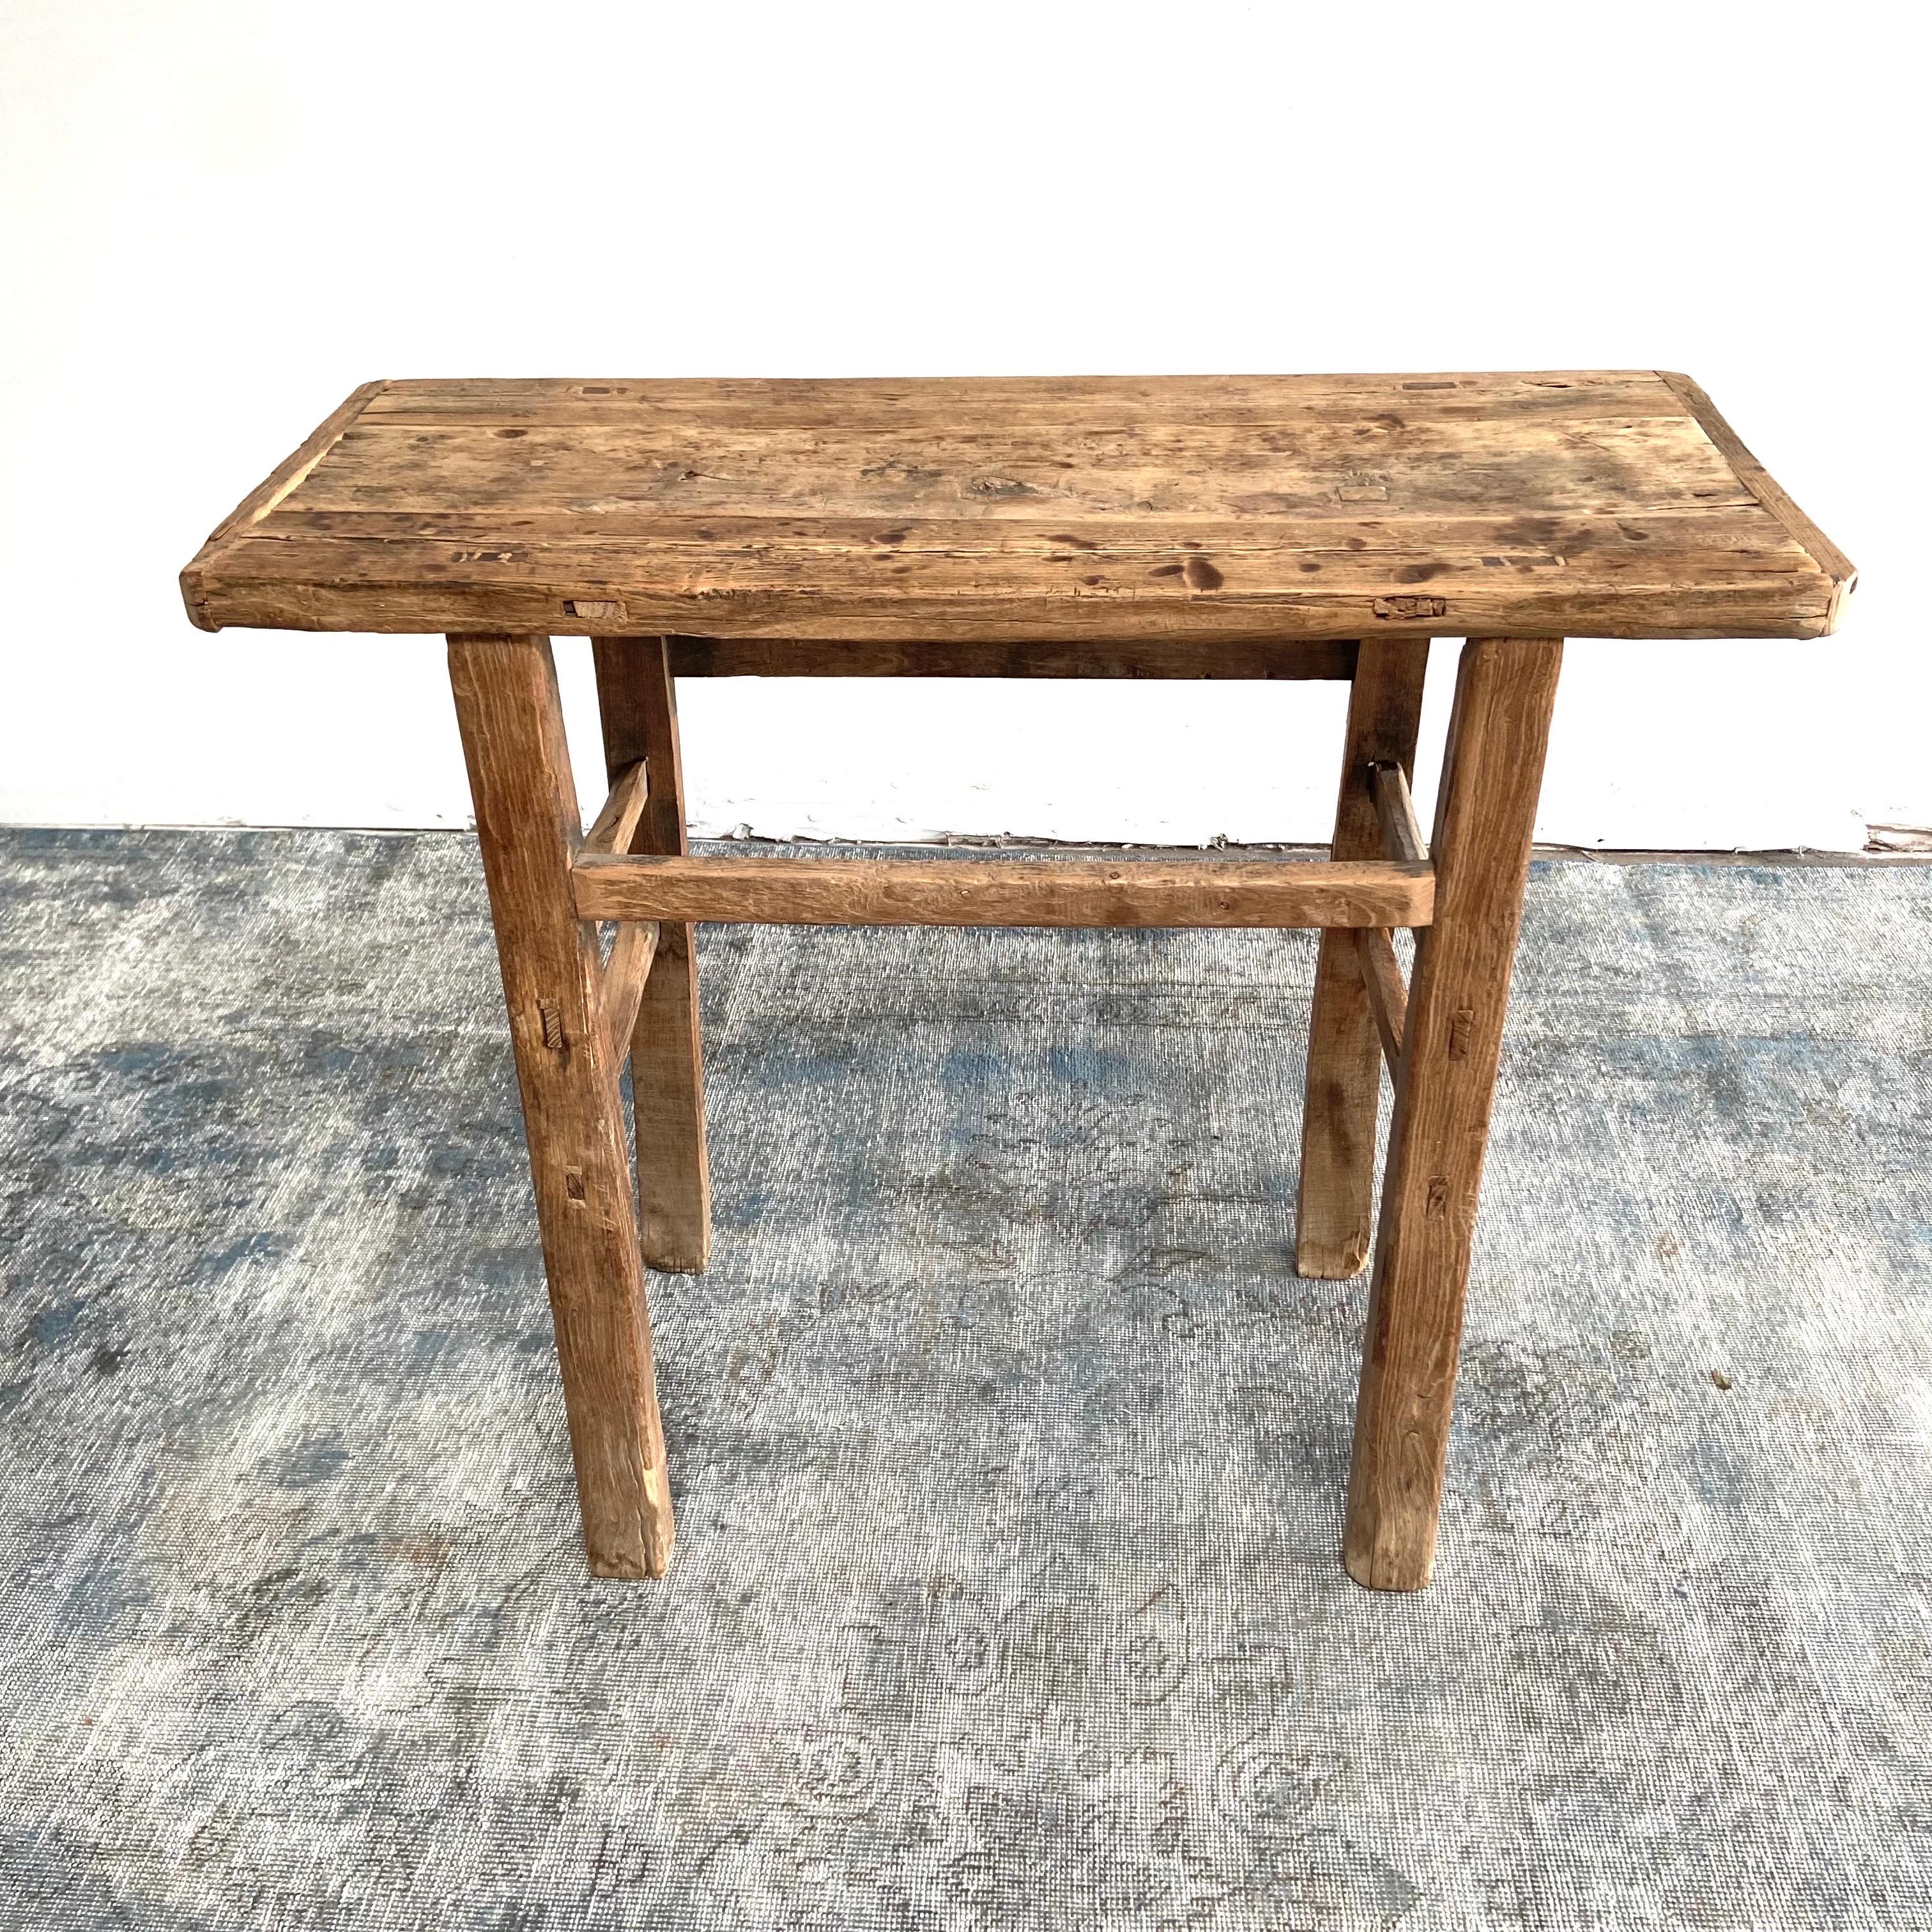 Vintage antique elm wood console table Made from Vintage reclaimed elm wood. Beautiful antique patina, with weathering and age, these are solid and sturdy ready for daily use, use as an entry table, sofa table or console in a dining room. Great in a